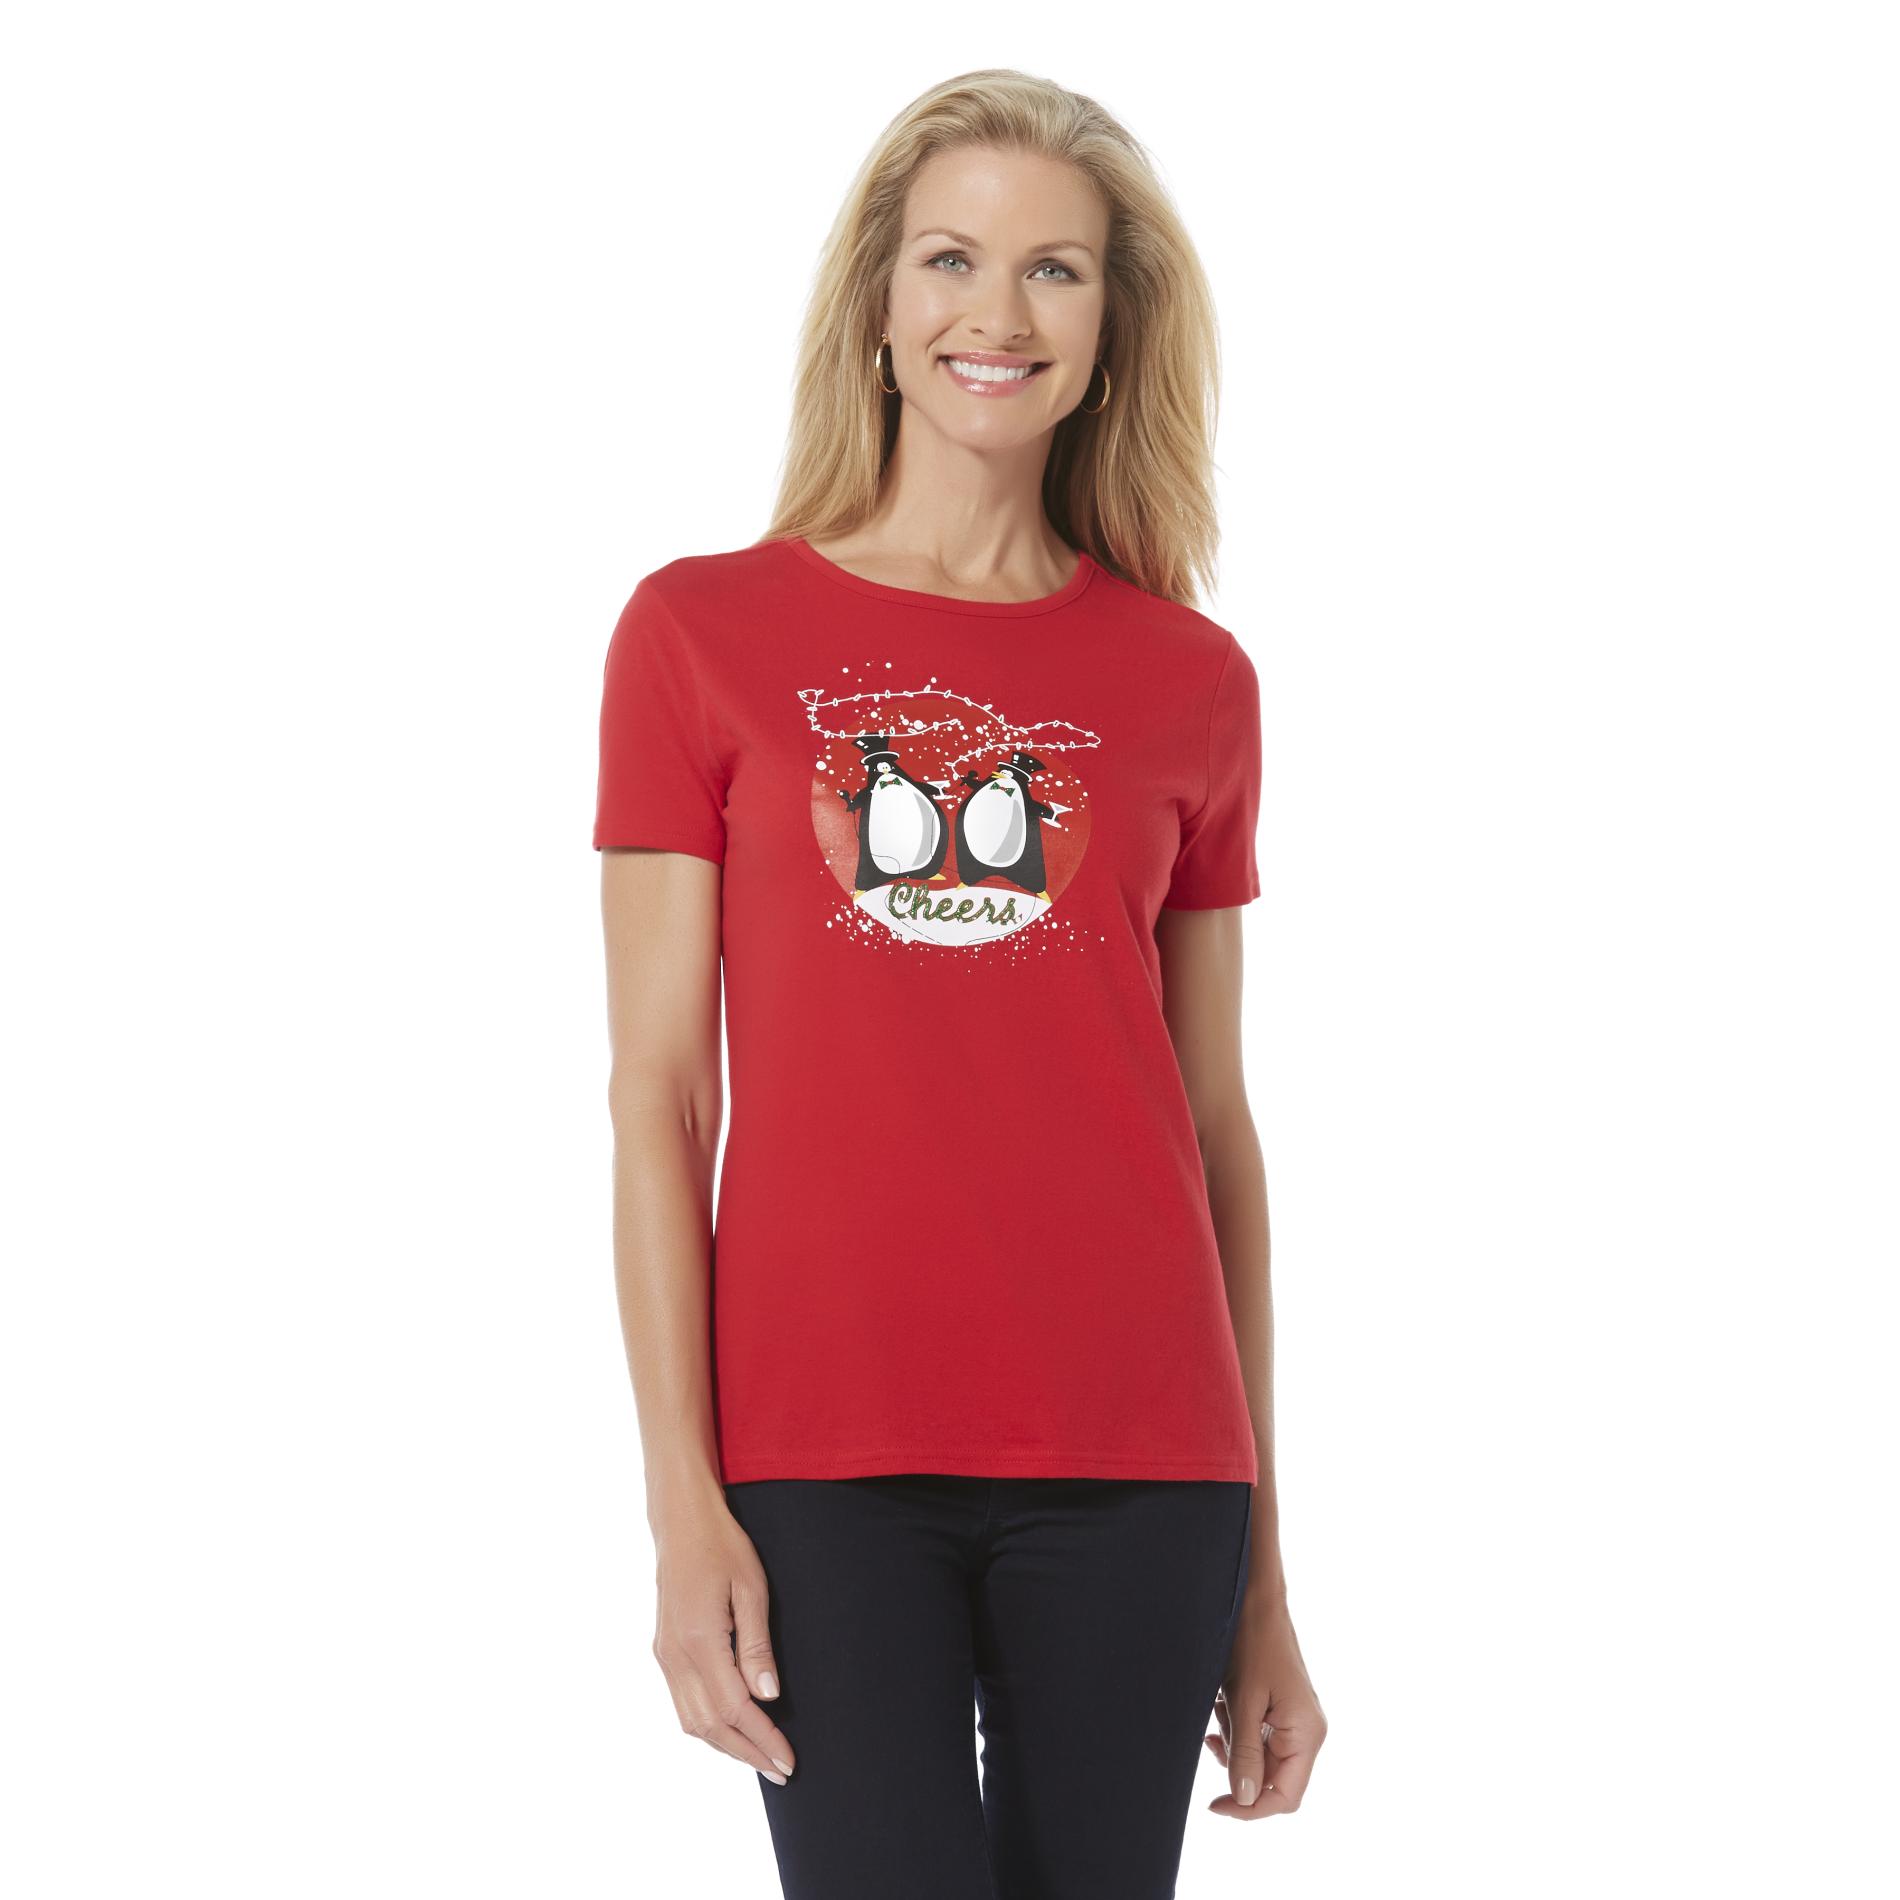 Holiday Editions Women's Plus Christmas Graphic T-Shirt - Penguins